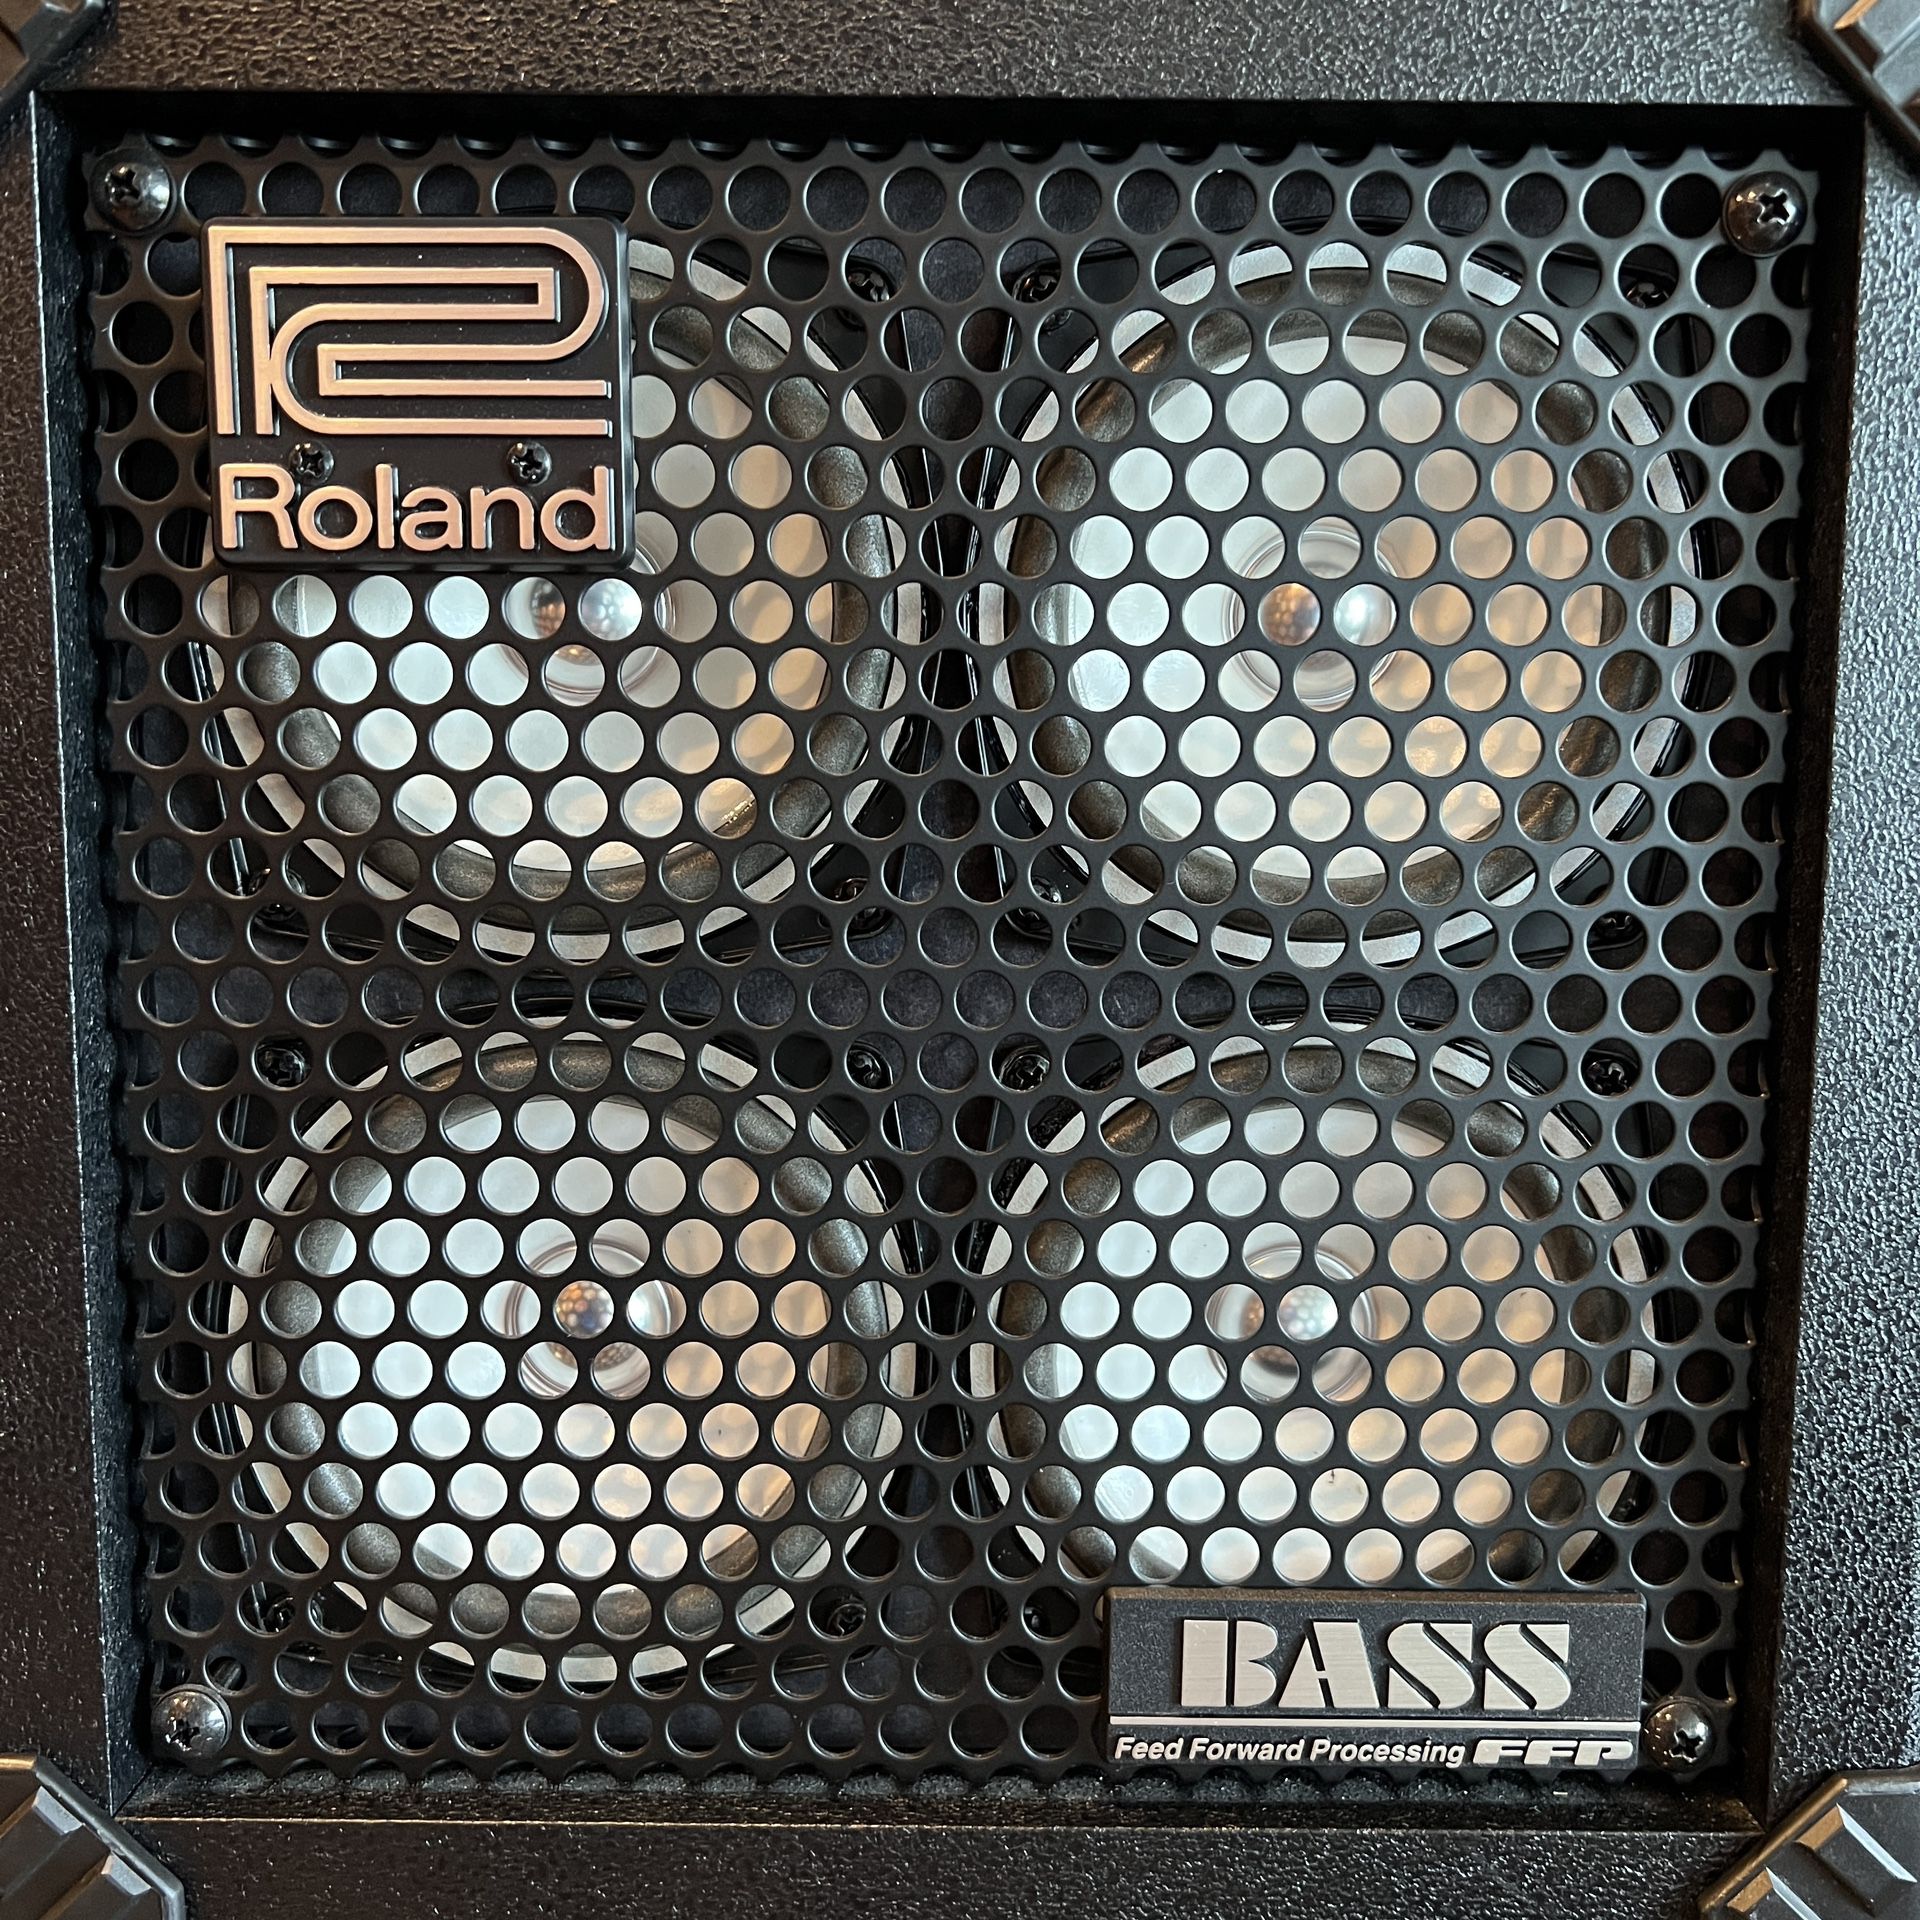 Roland Micro Cube Bass RX Portable Amp for Sale in Portland, OR